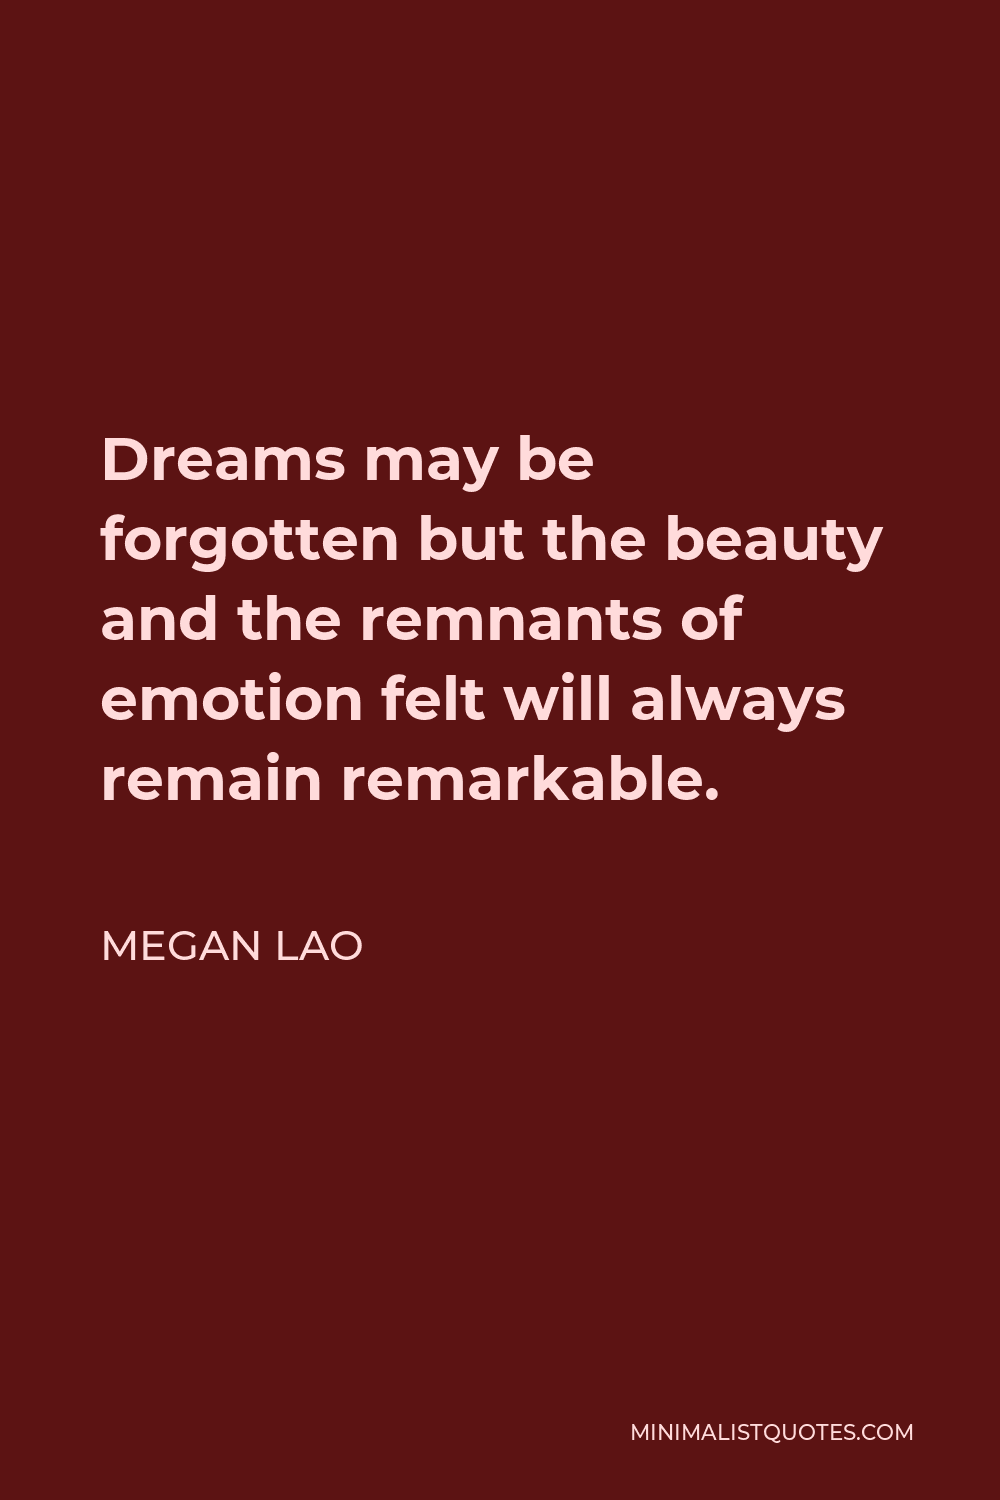 Megan Lao Quote - Dreams may be forgotten but the beauty and the remnants of emotion felt will always remain remarkable.